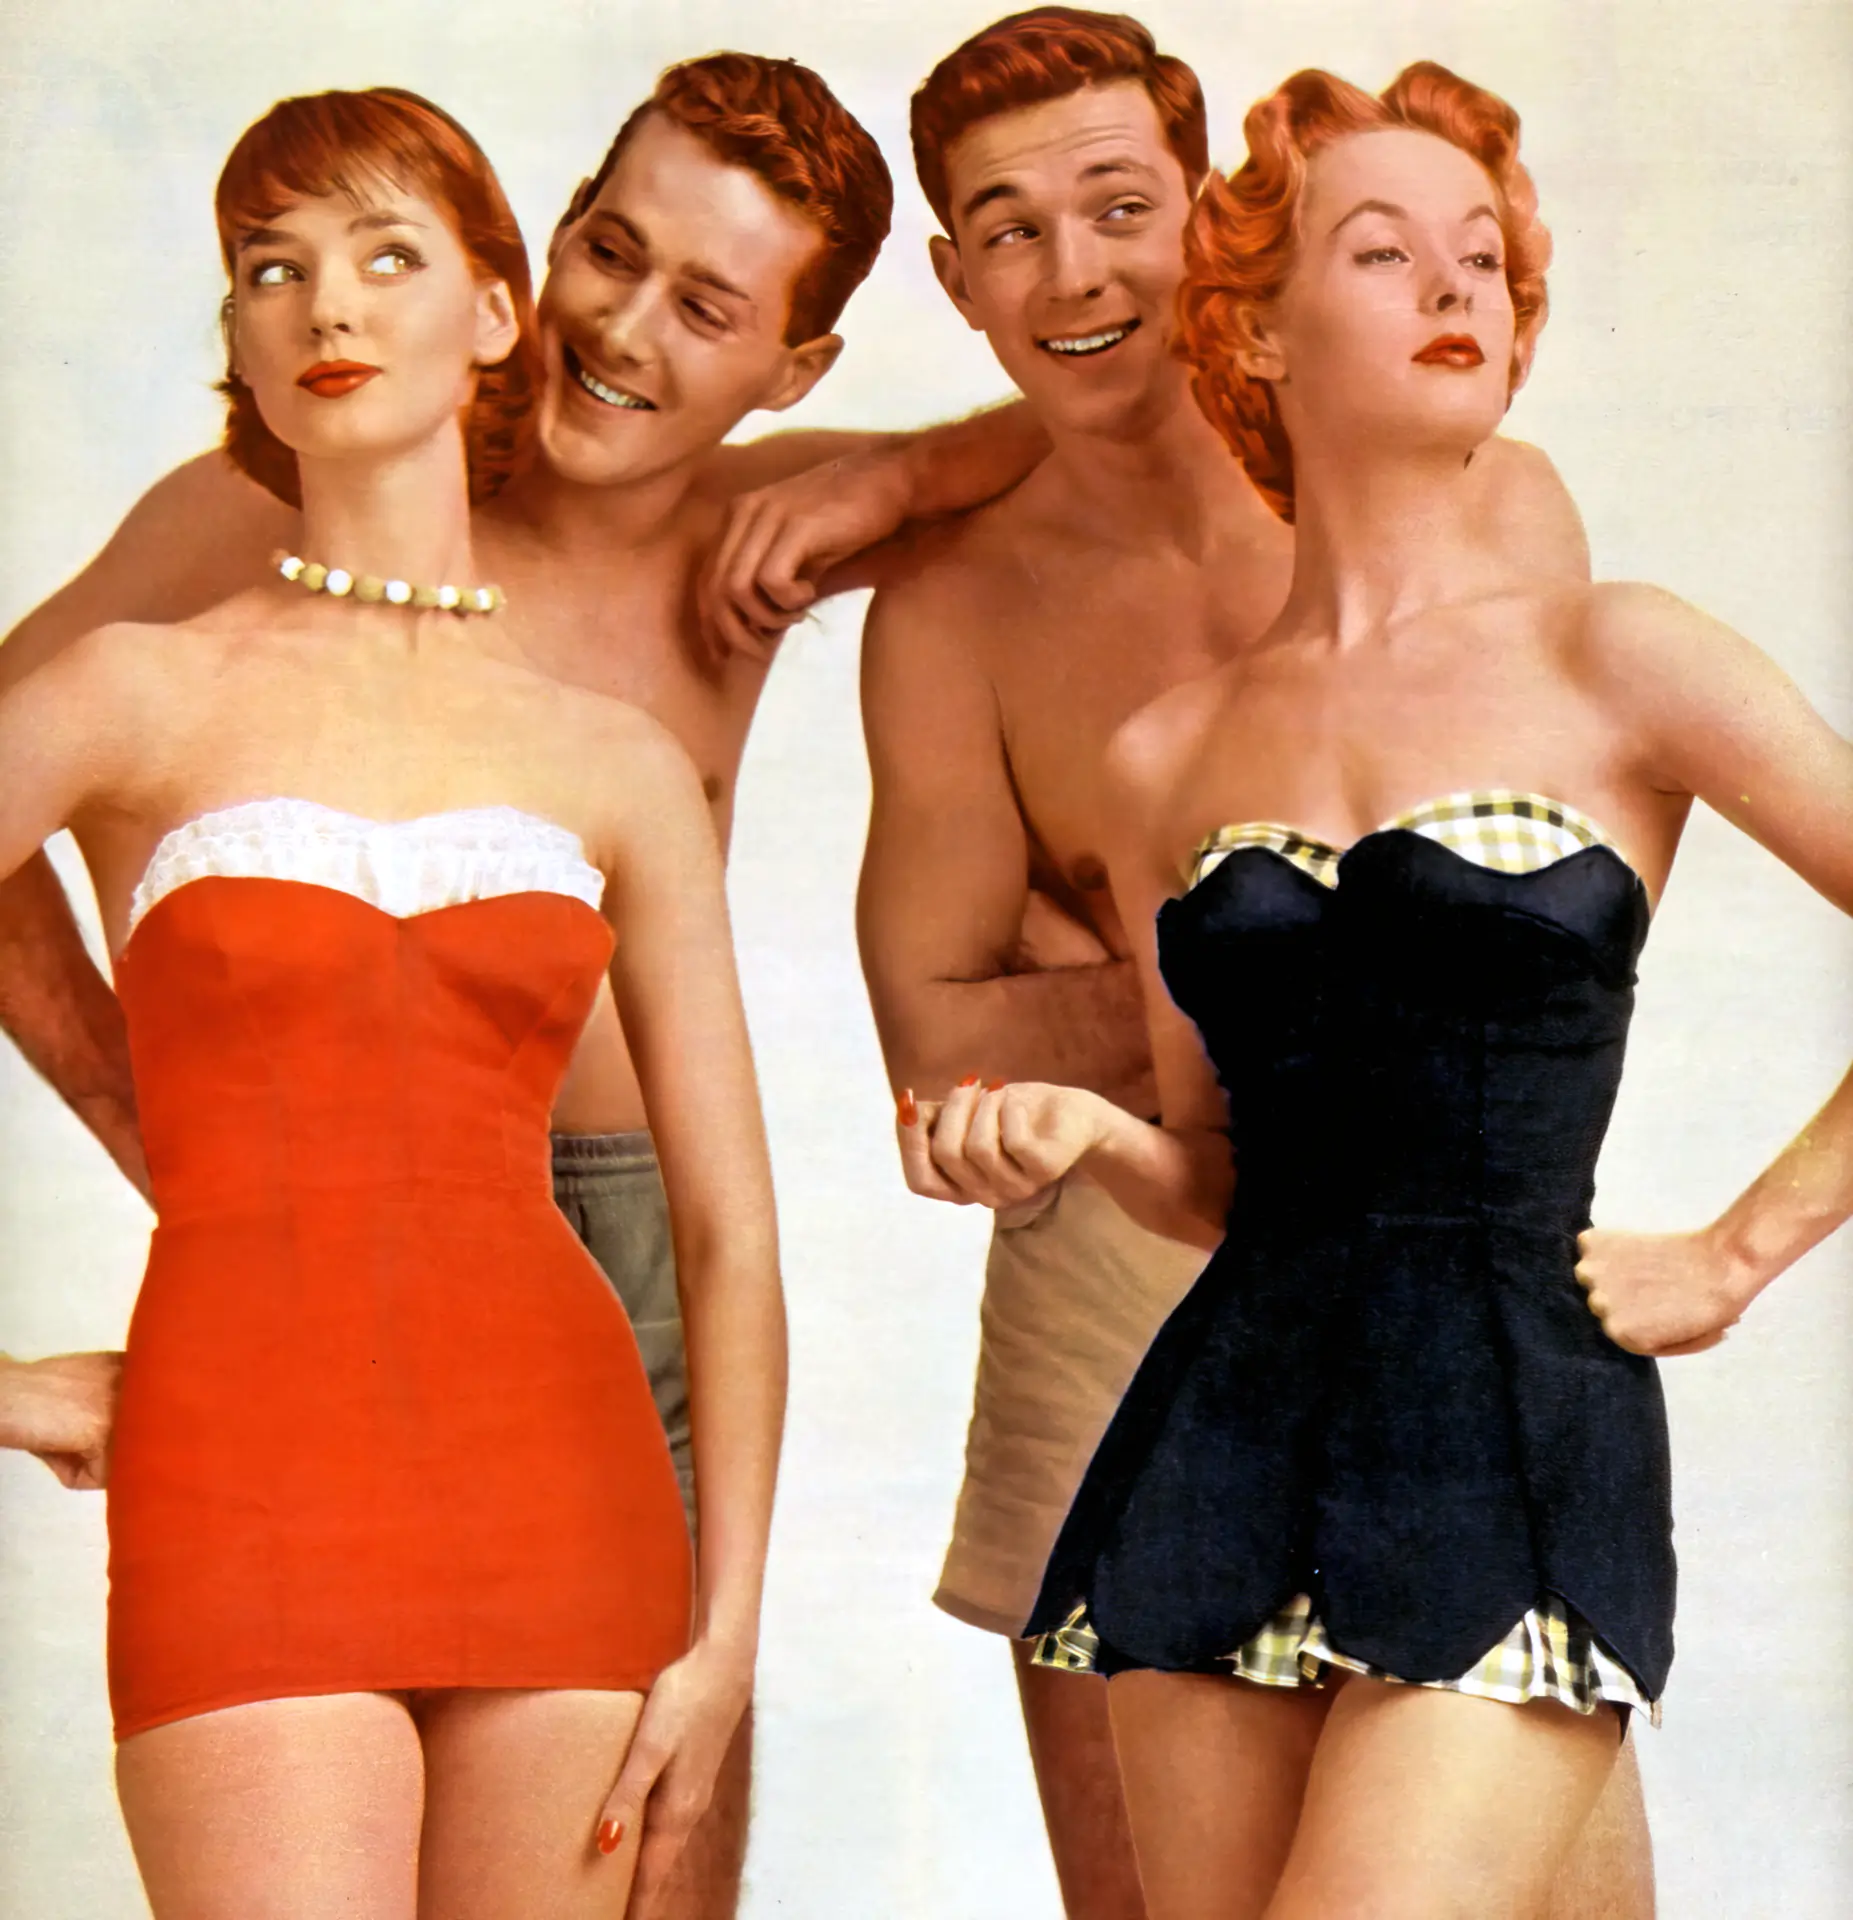 Two amazing retro girls with two guys standing behind them